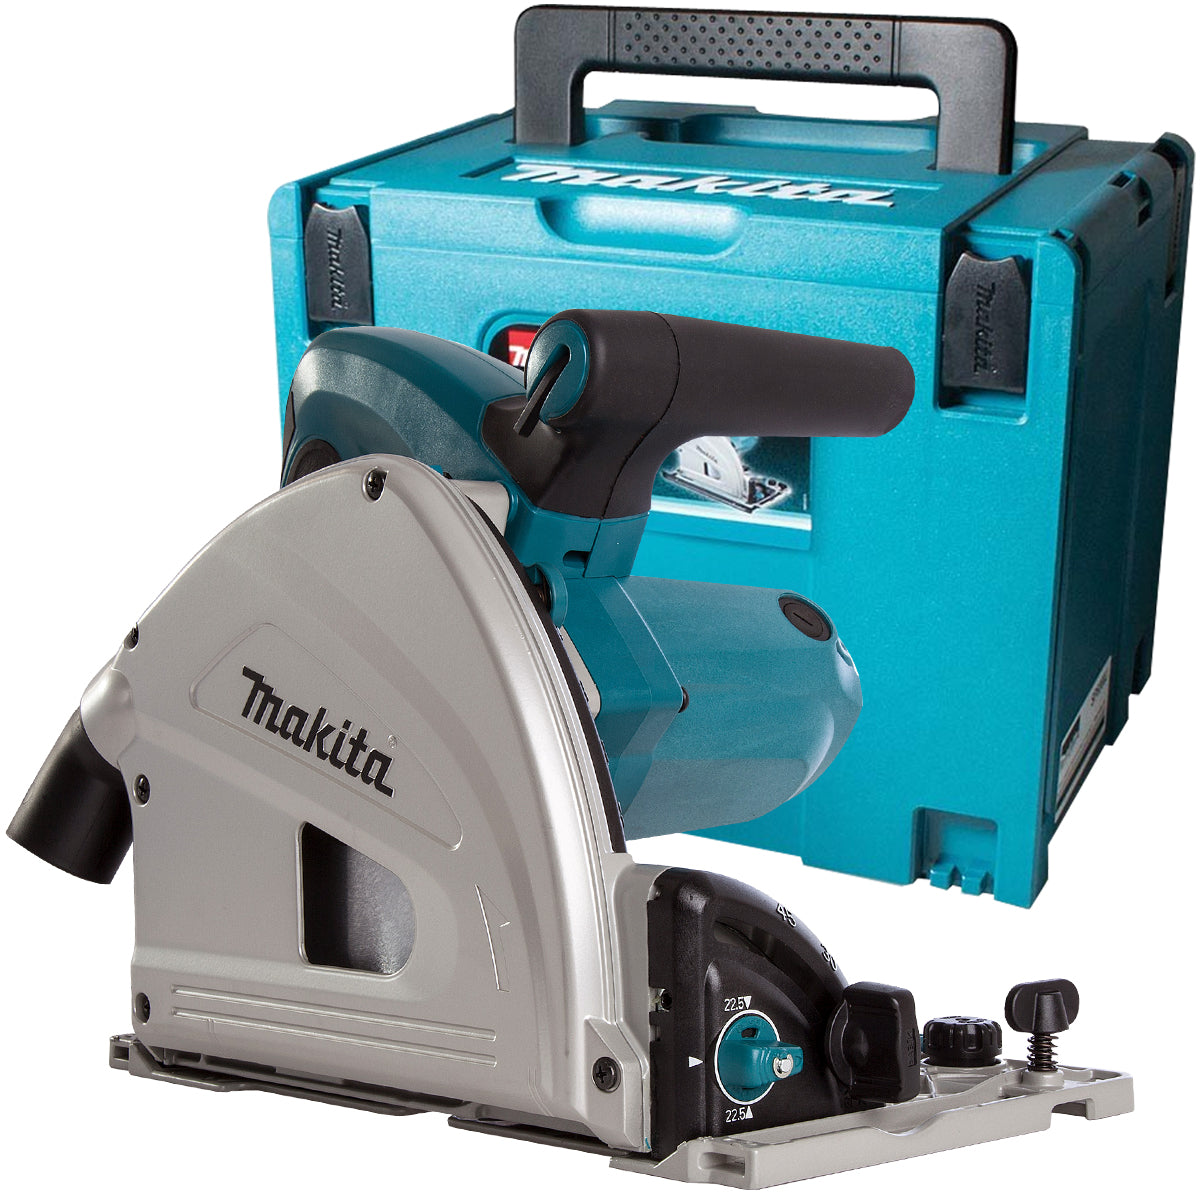 Makita SP6000J2 165mm Plunge Saw 240V with 2 x 1.5m Guide Rail in Bag + Connector & Case